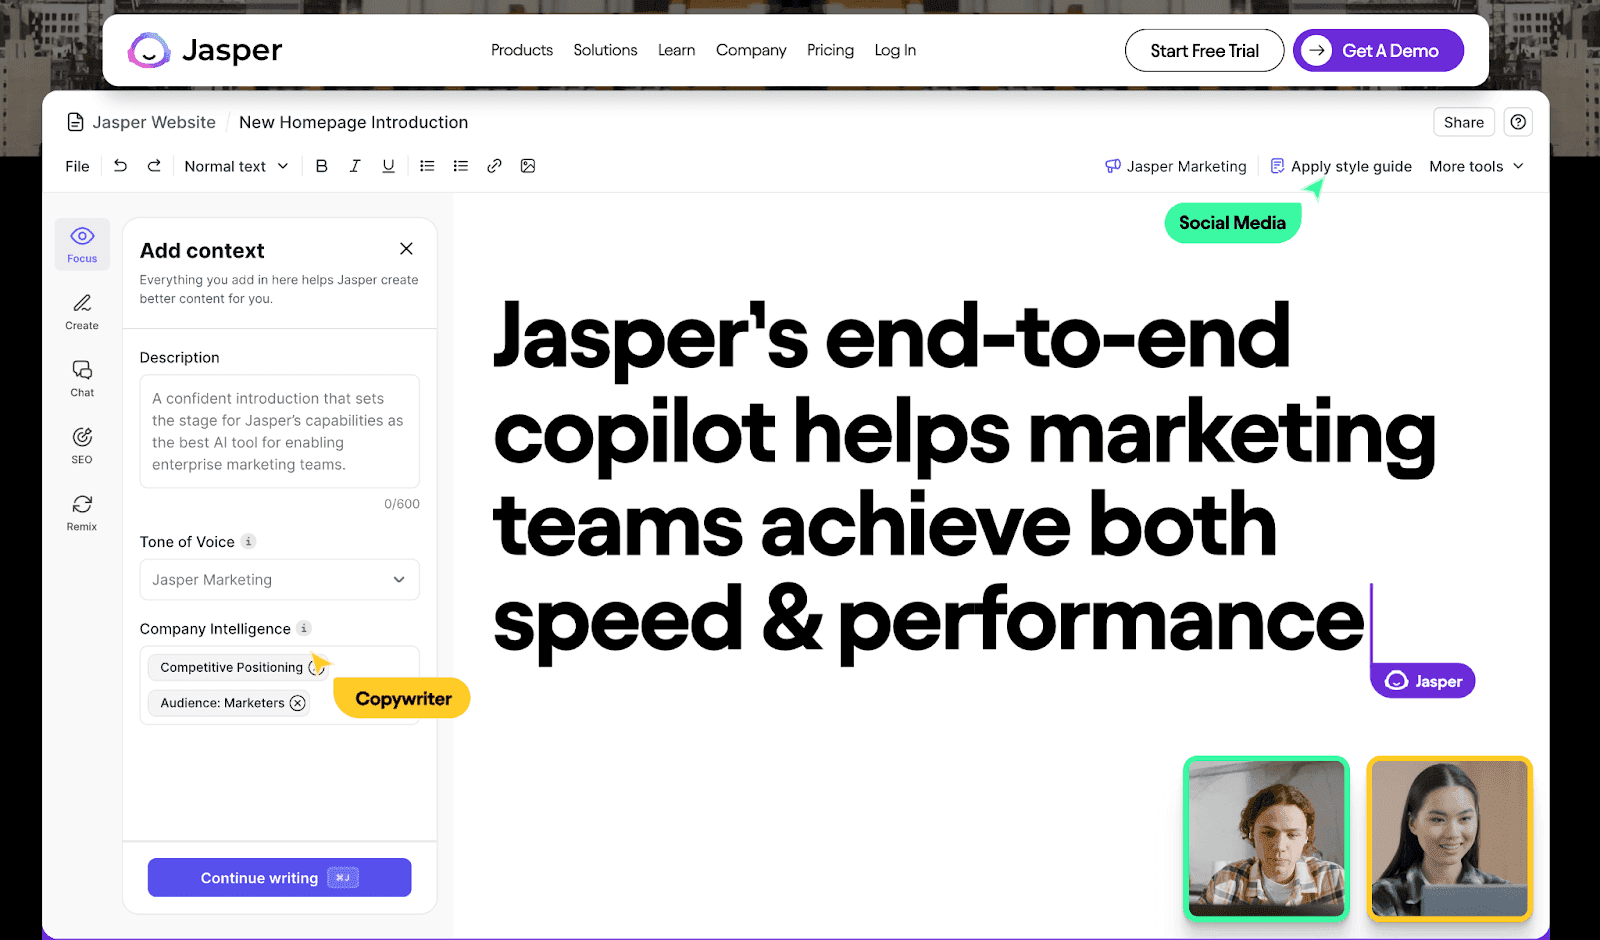 Jasper's end-to-end copilot helps marketing teams achieve both speed & performance